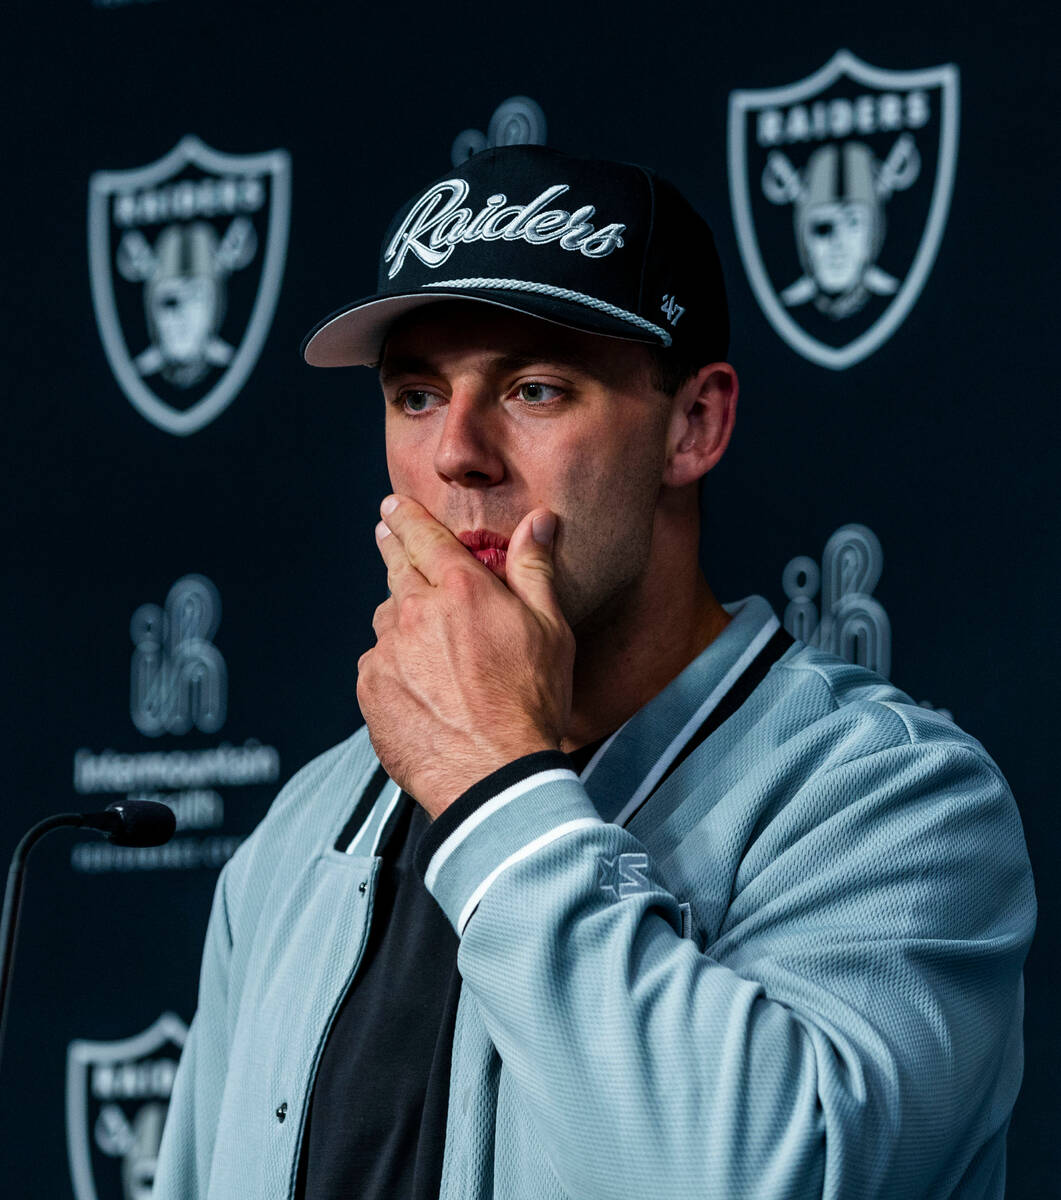 Raiders first round draft pick Brock Bowers considers a question as he speaks during a press co ...